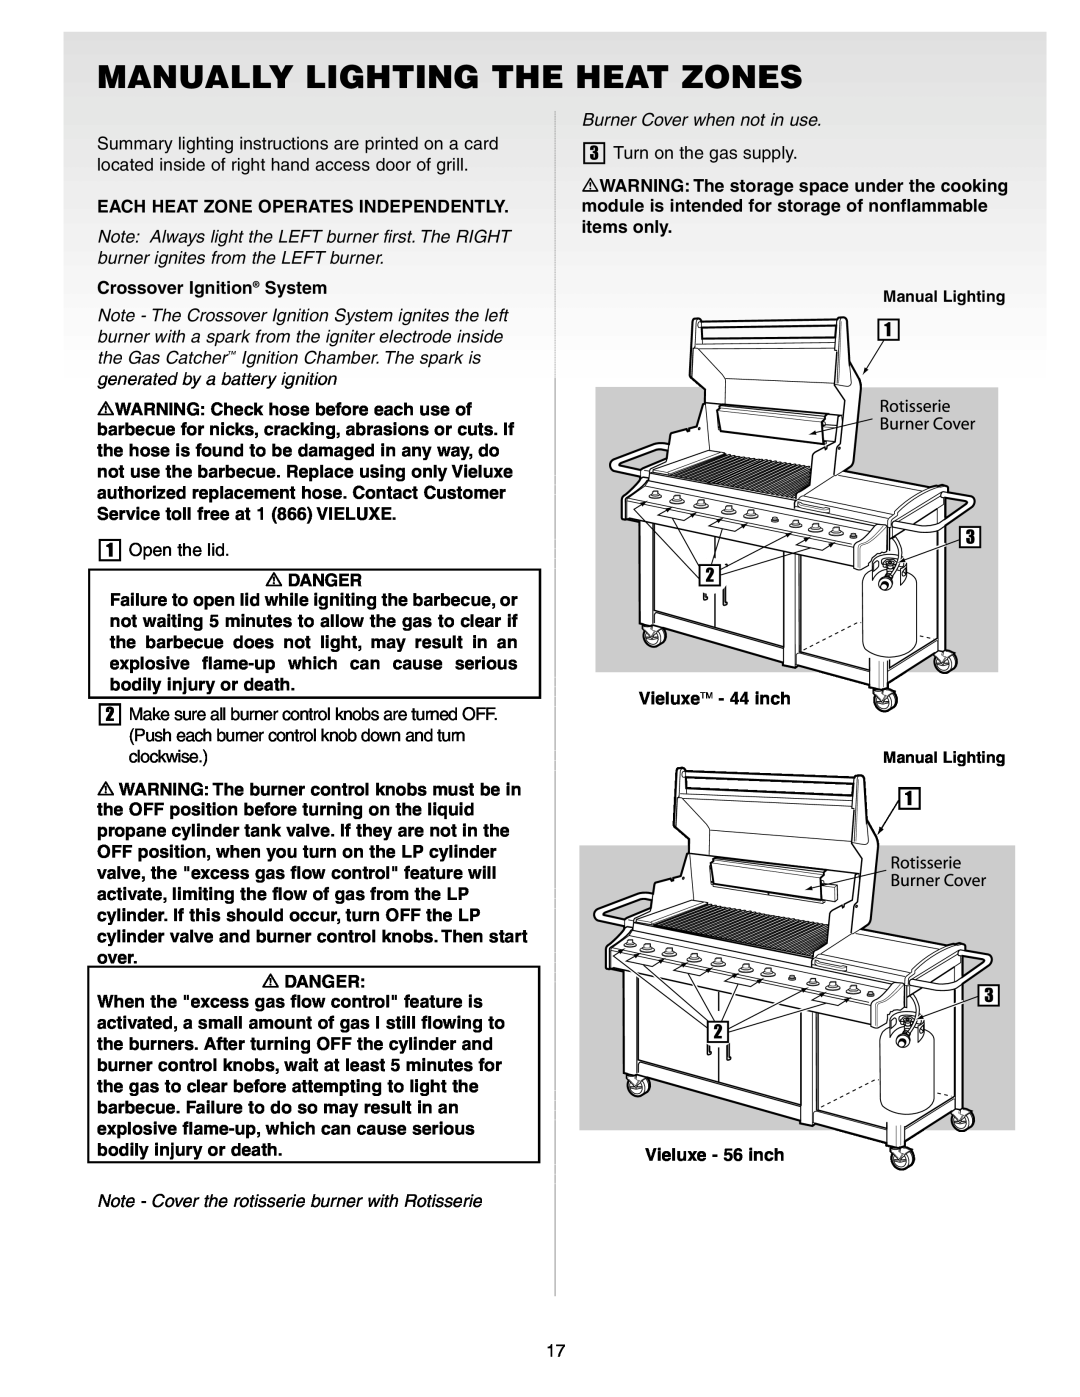 Weber Gas Burner manual Manually Lighting The Heat Zones, Burner Cover when not in use 